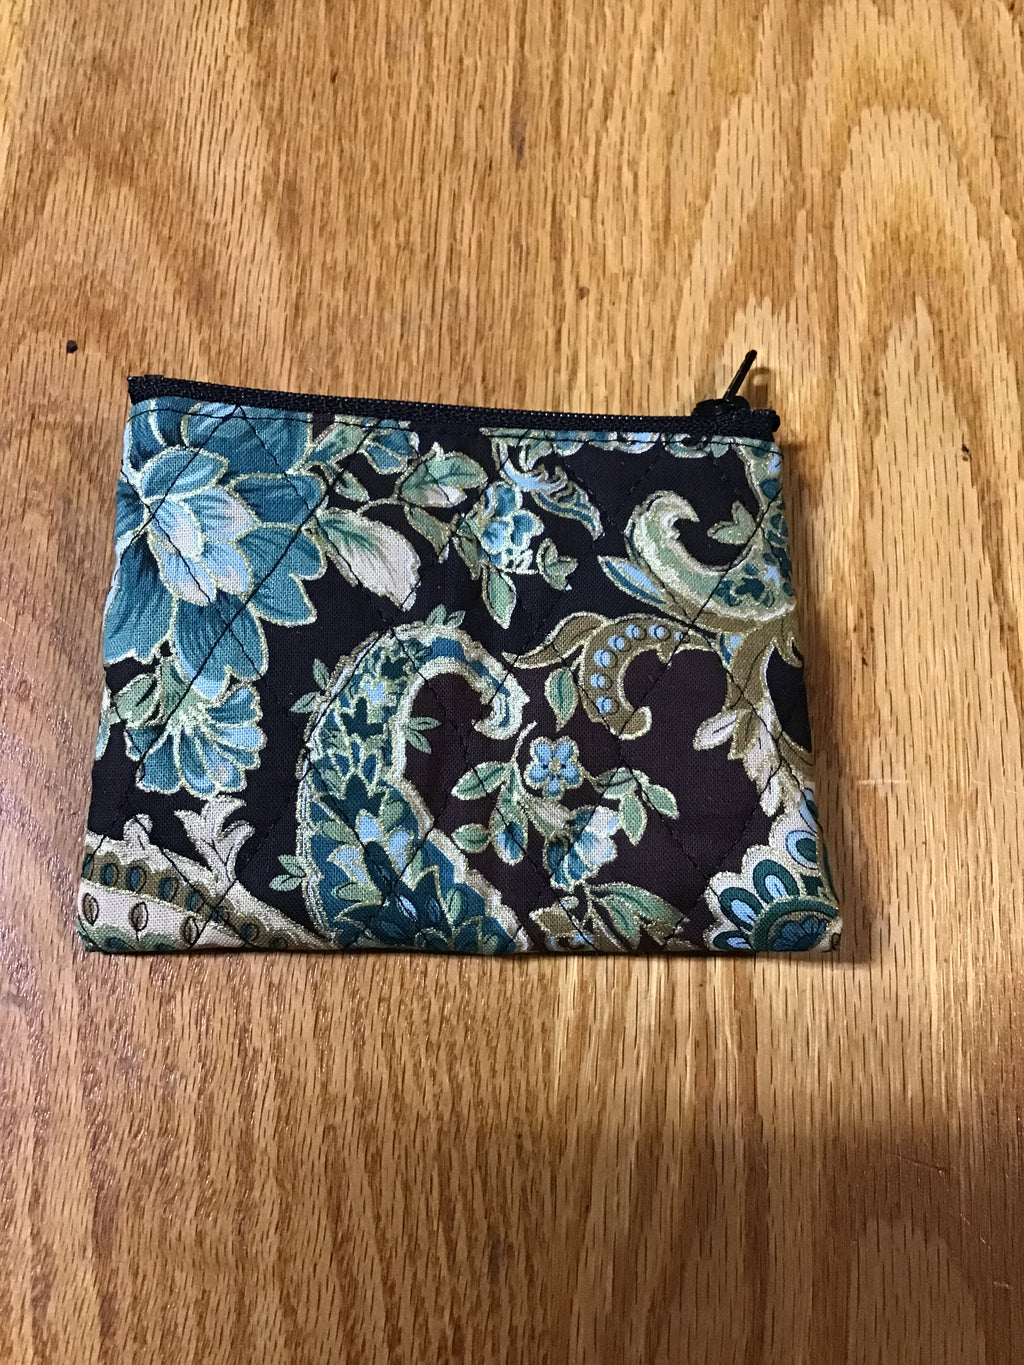 #19 Teal/Brown Paisley Mini Zip Case Pouch